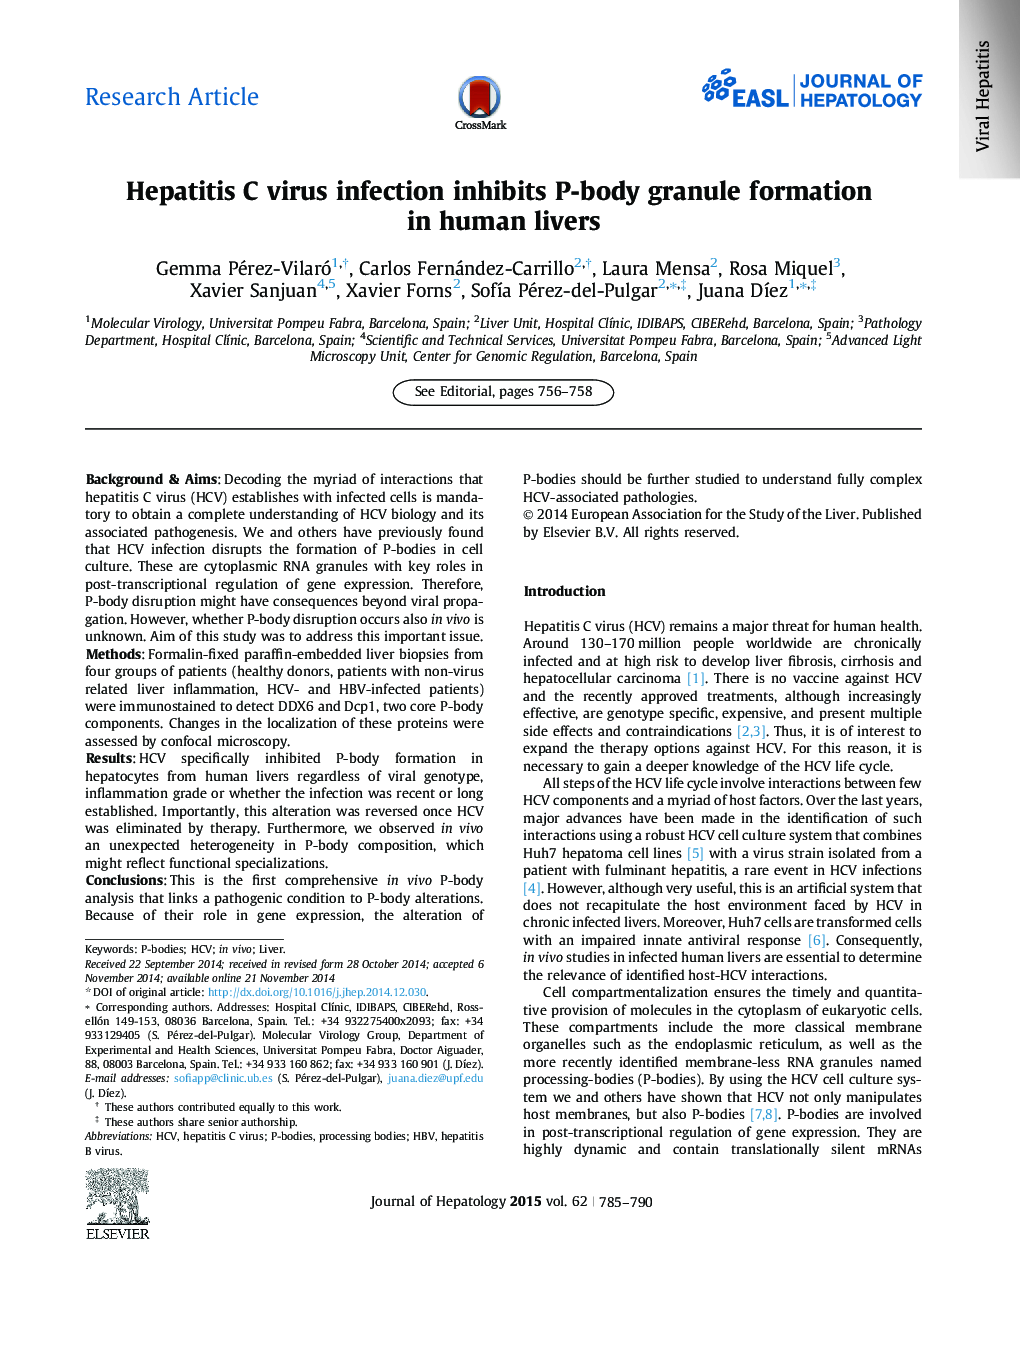 Research ArticleHepatitis C virus infection inhibits P-body granule formation in human livers